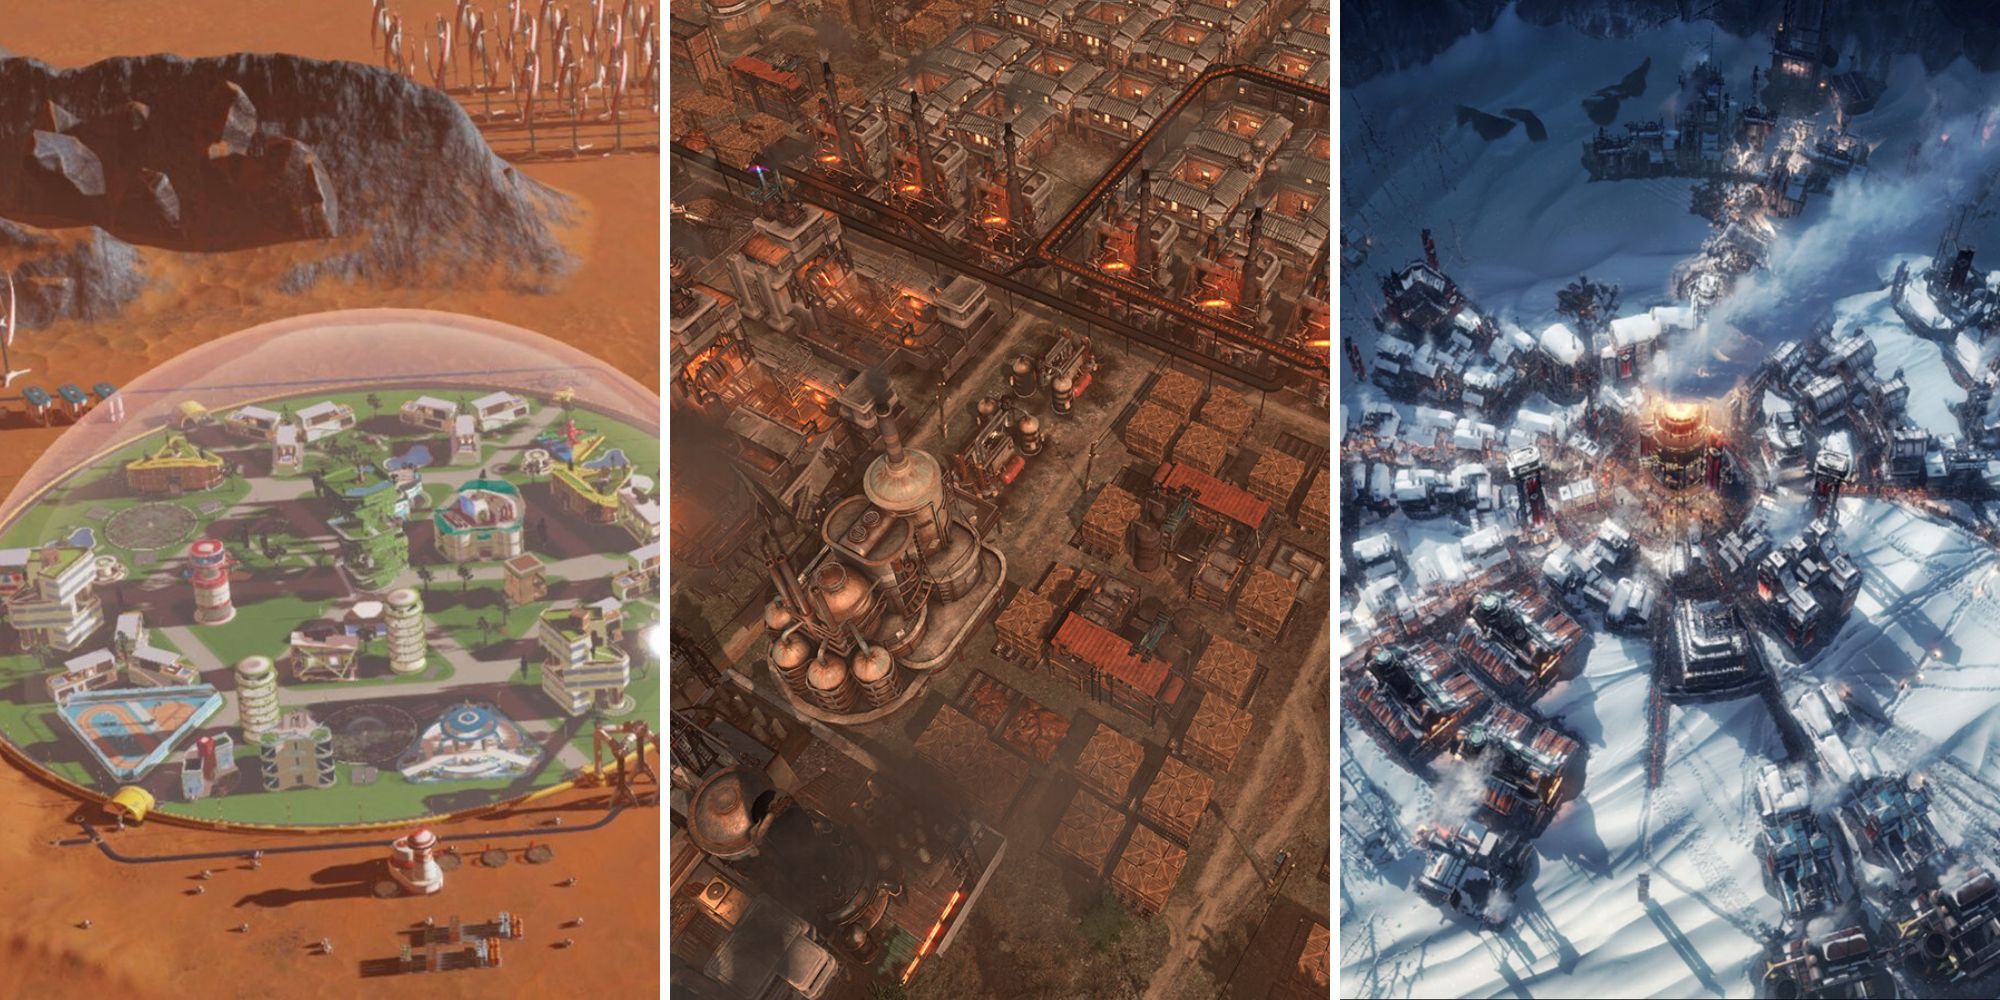 A grid showing the survival city builder games Surviving Mars, New Cycle, and Frostpunk